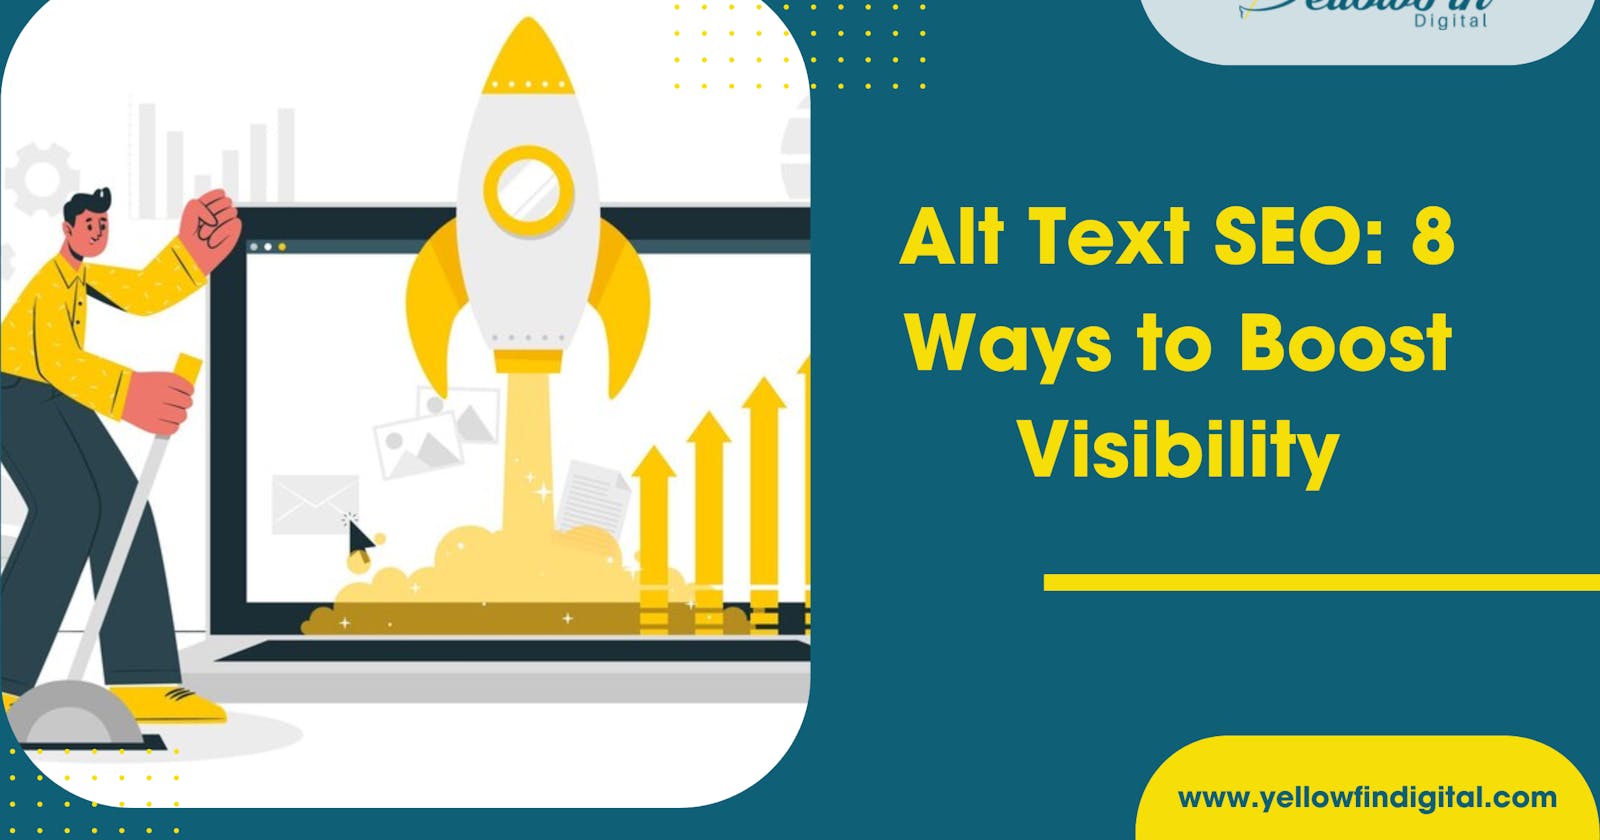 Alt Text SEO: 8 Ways to Boost Visibility